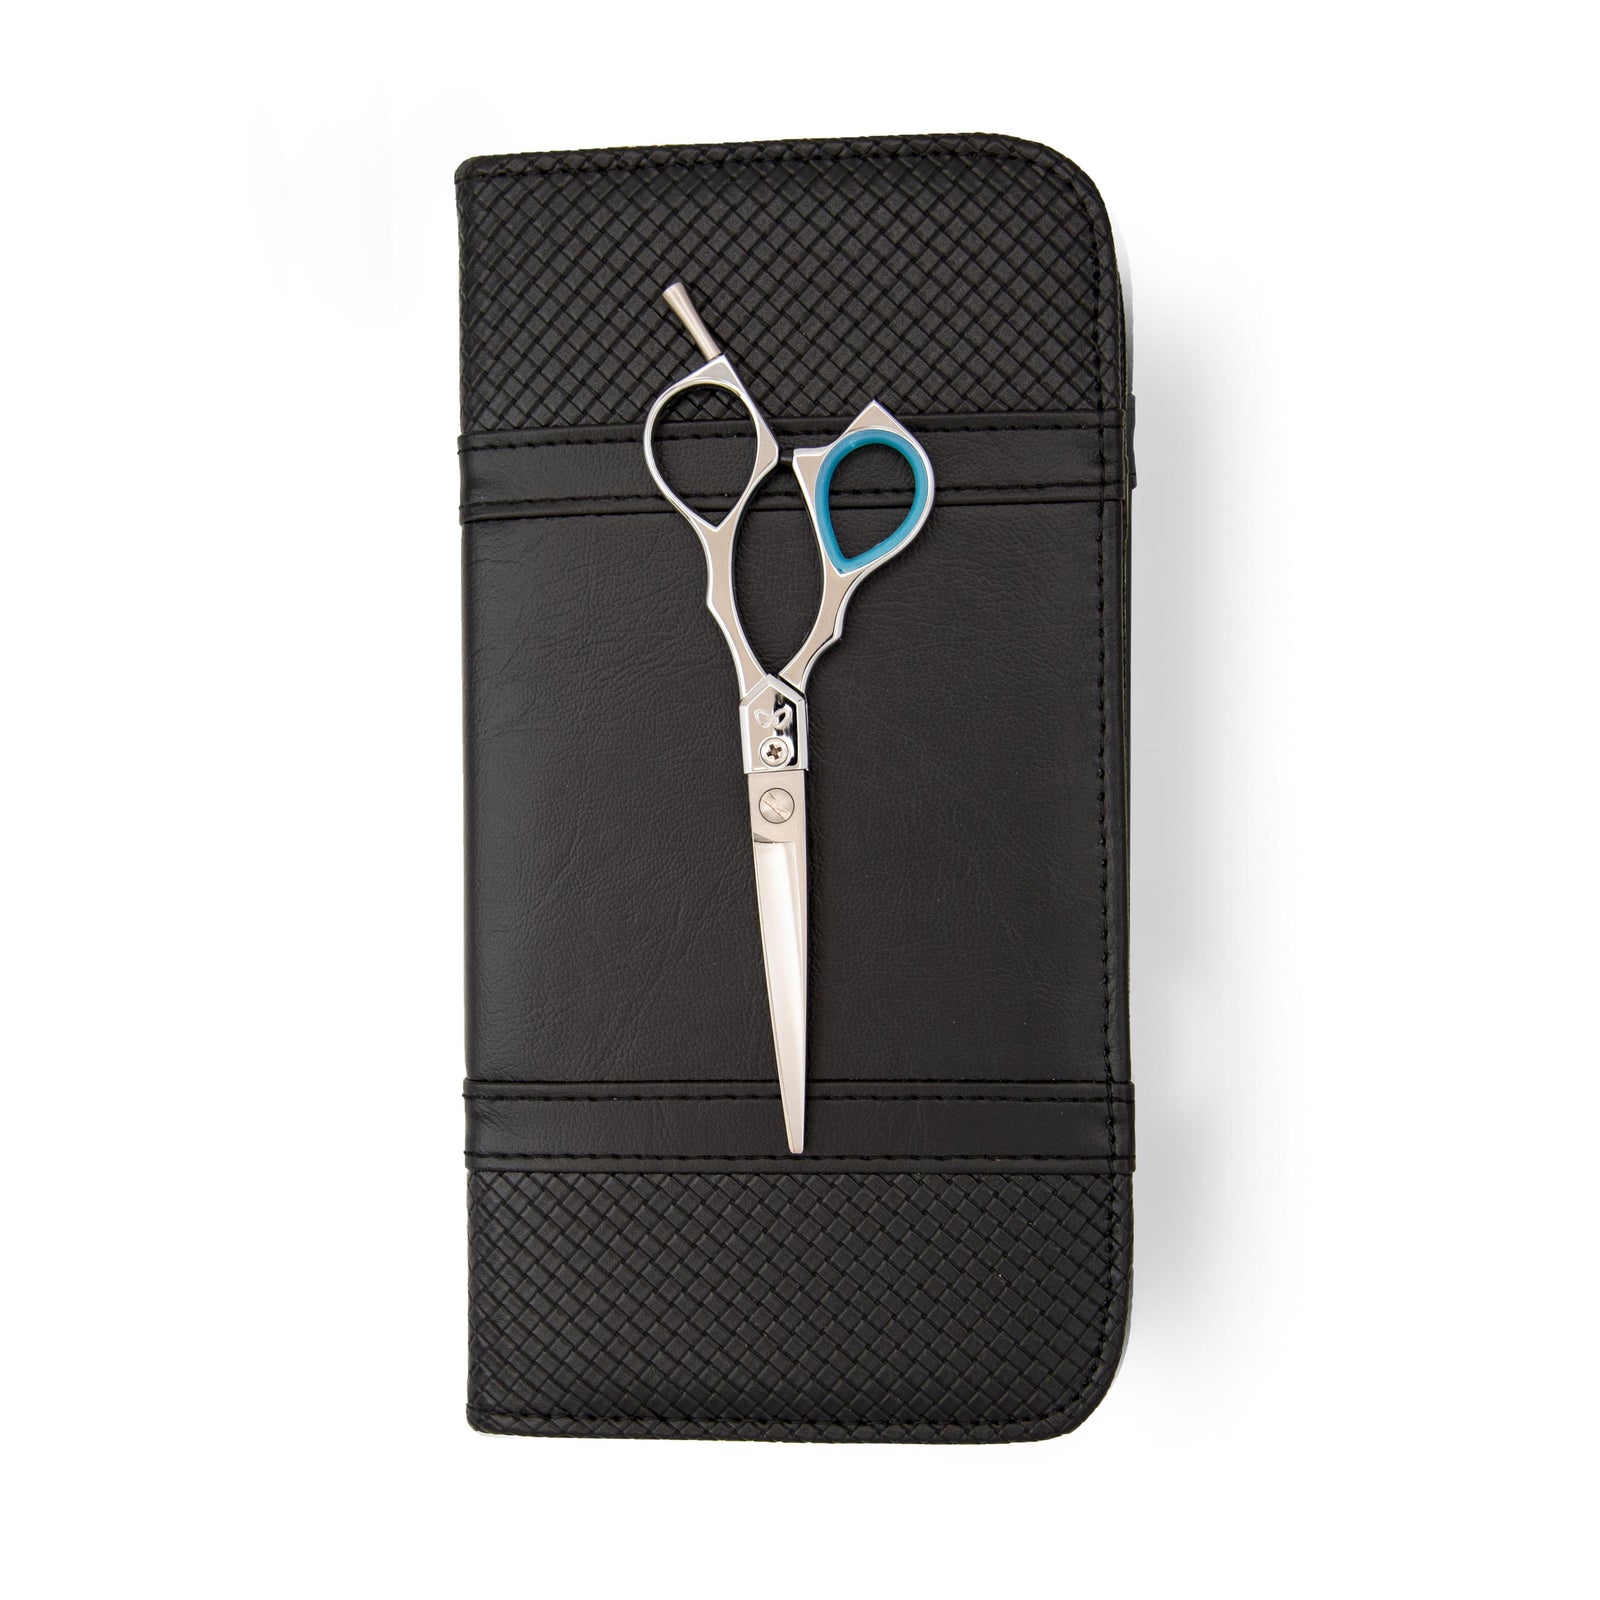 Classic Dry Cutting Shear - Precision Control & A Classic Offset Handle Left Handed / 7